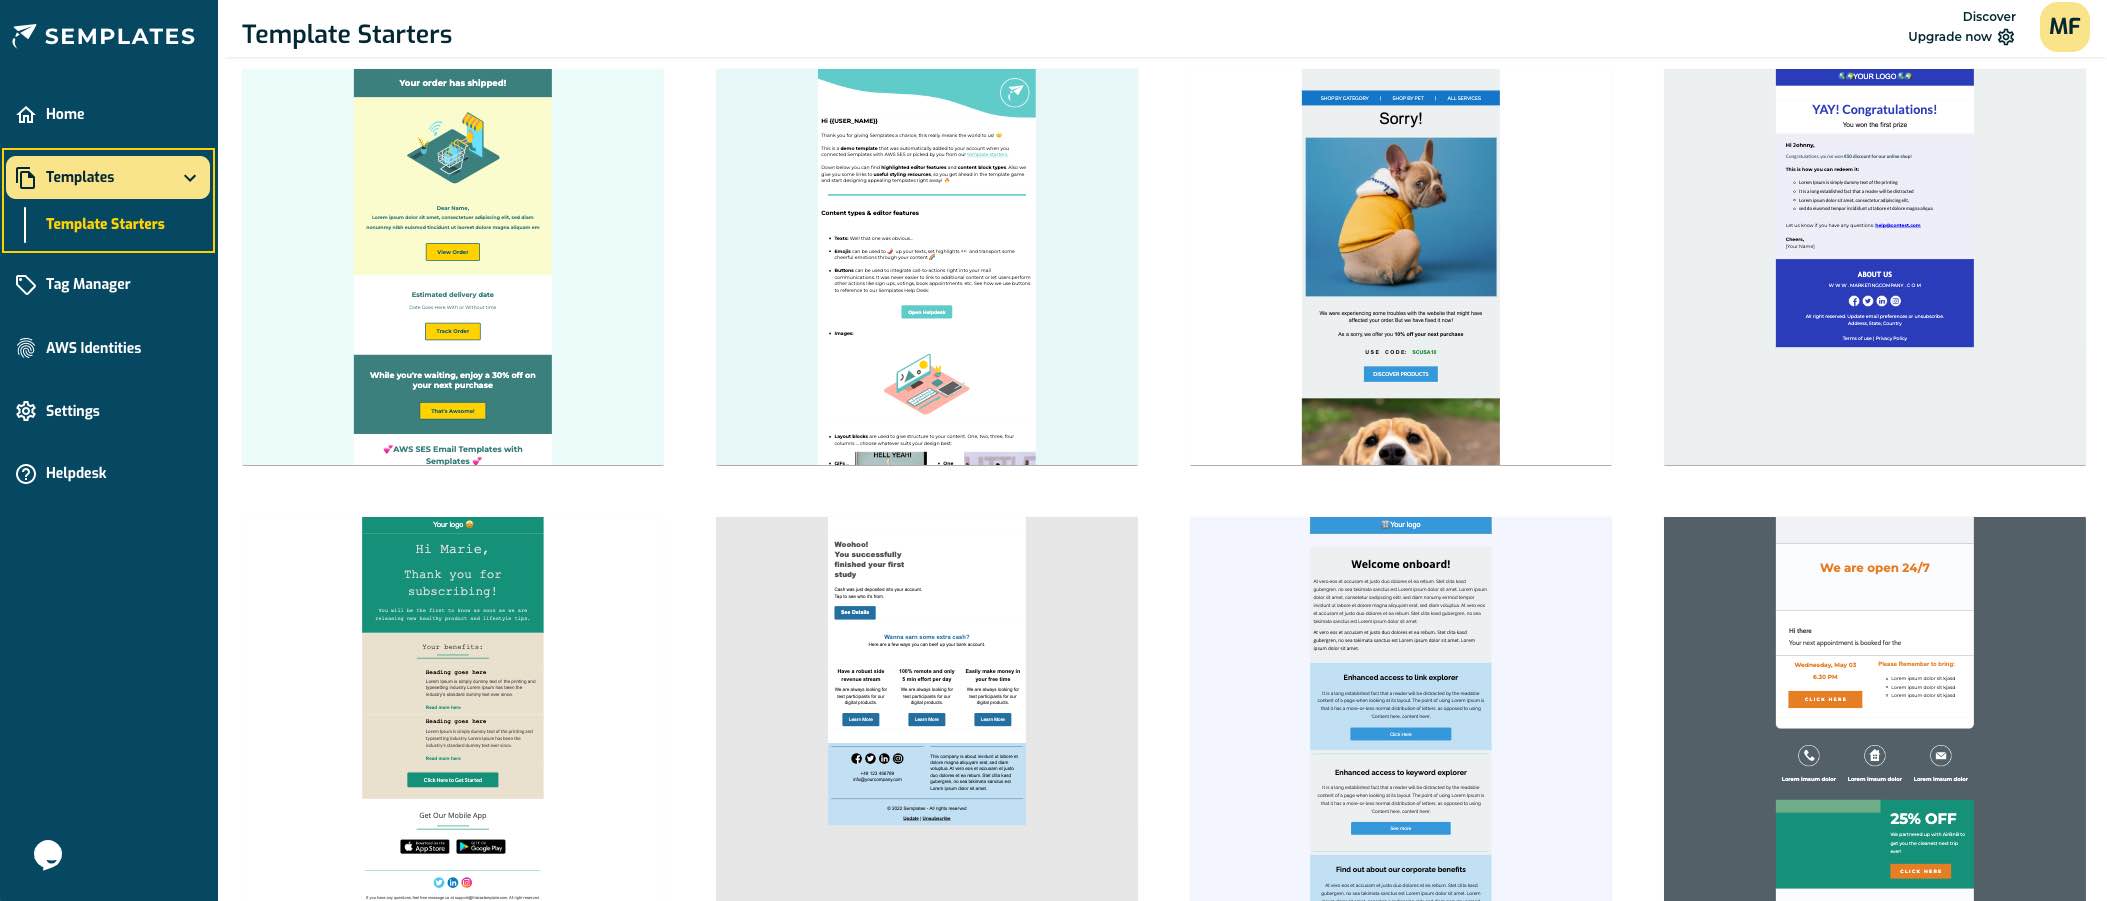 Screenshot of the template starters section